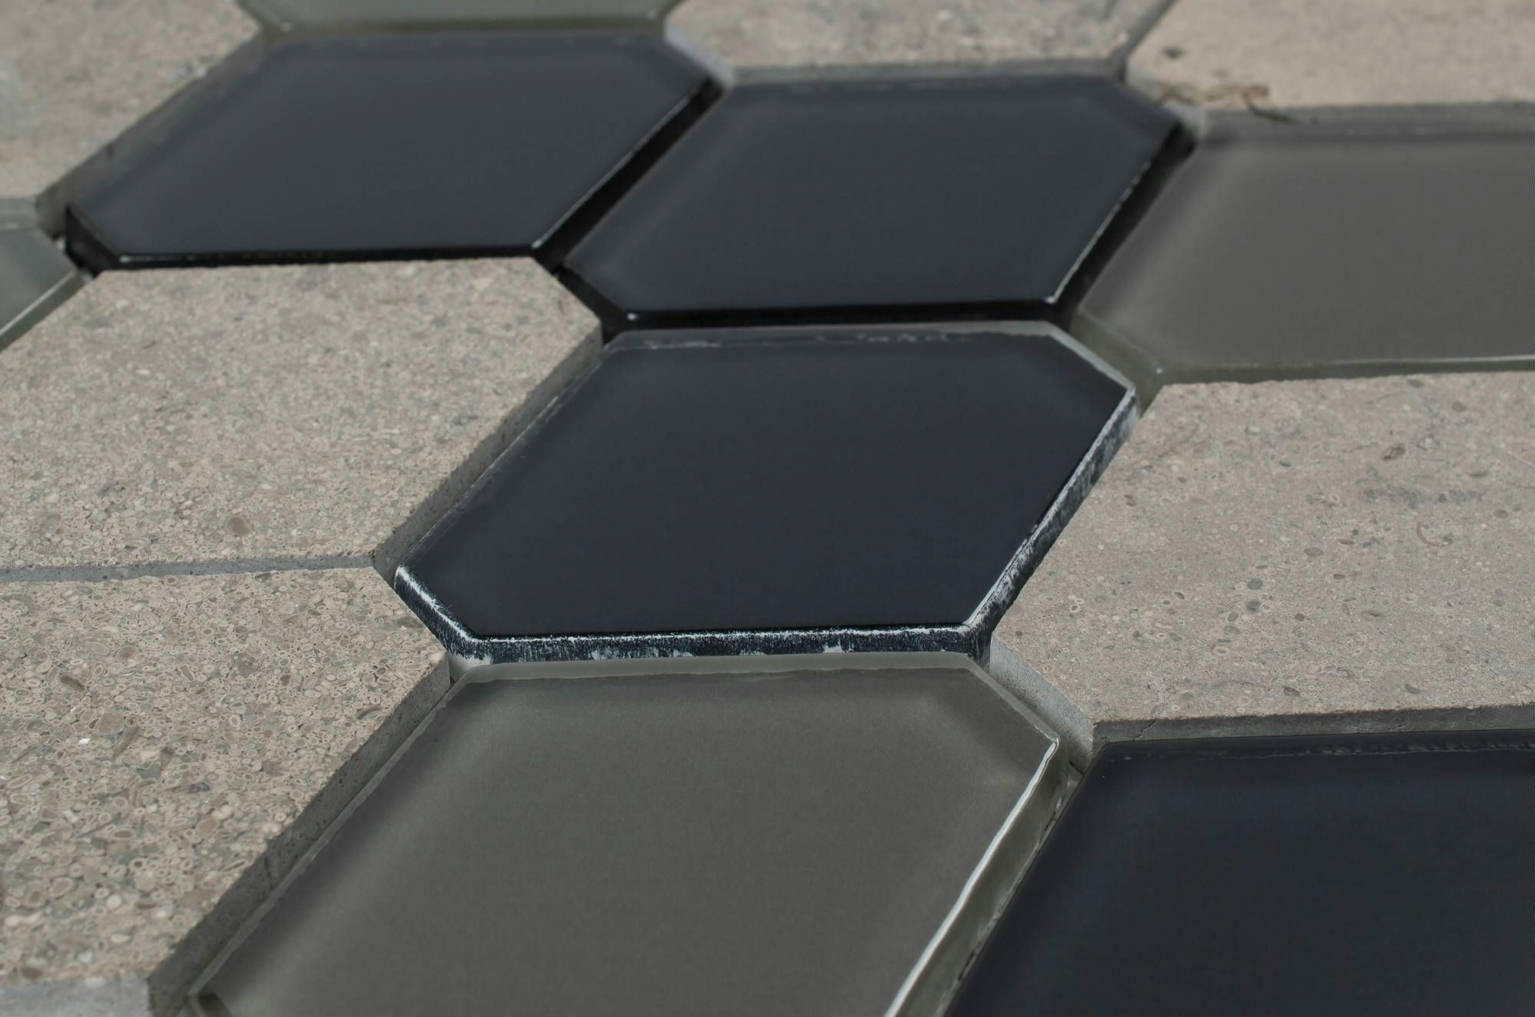 YS1537A | Stones And More | Finest selection of Mosaics, Glass, Tile and Stone